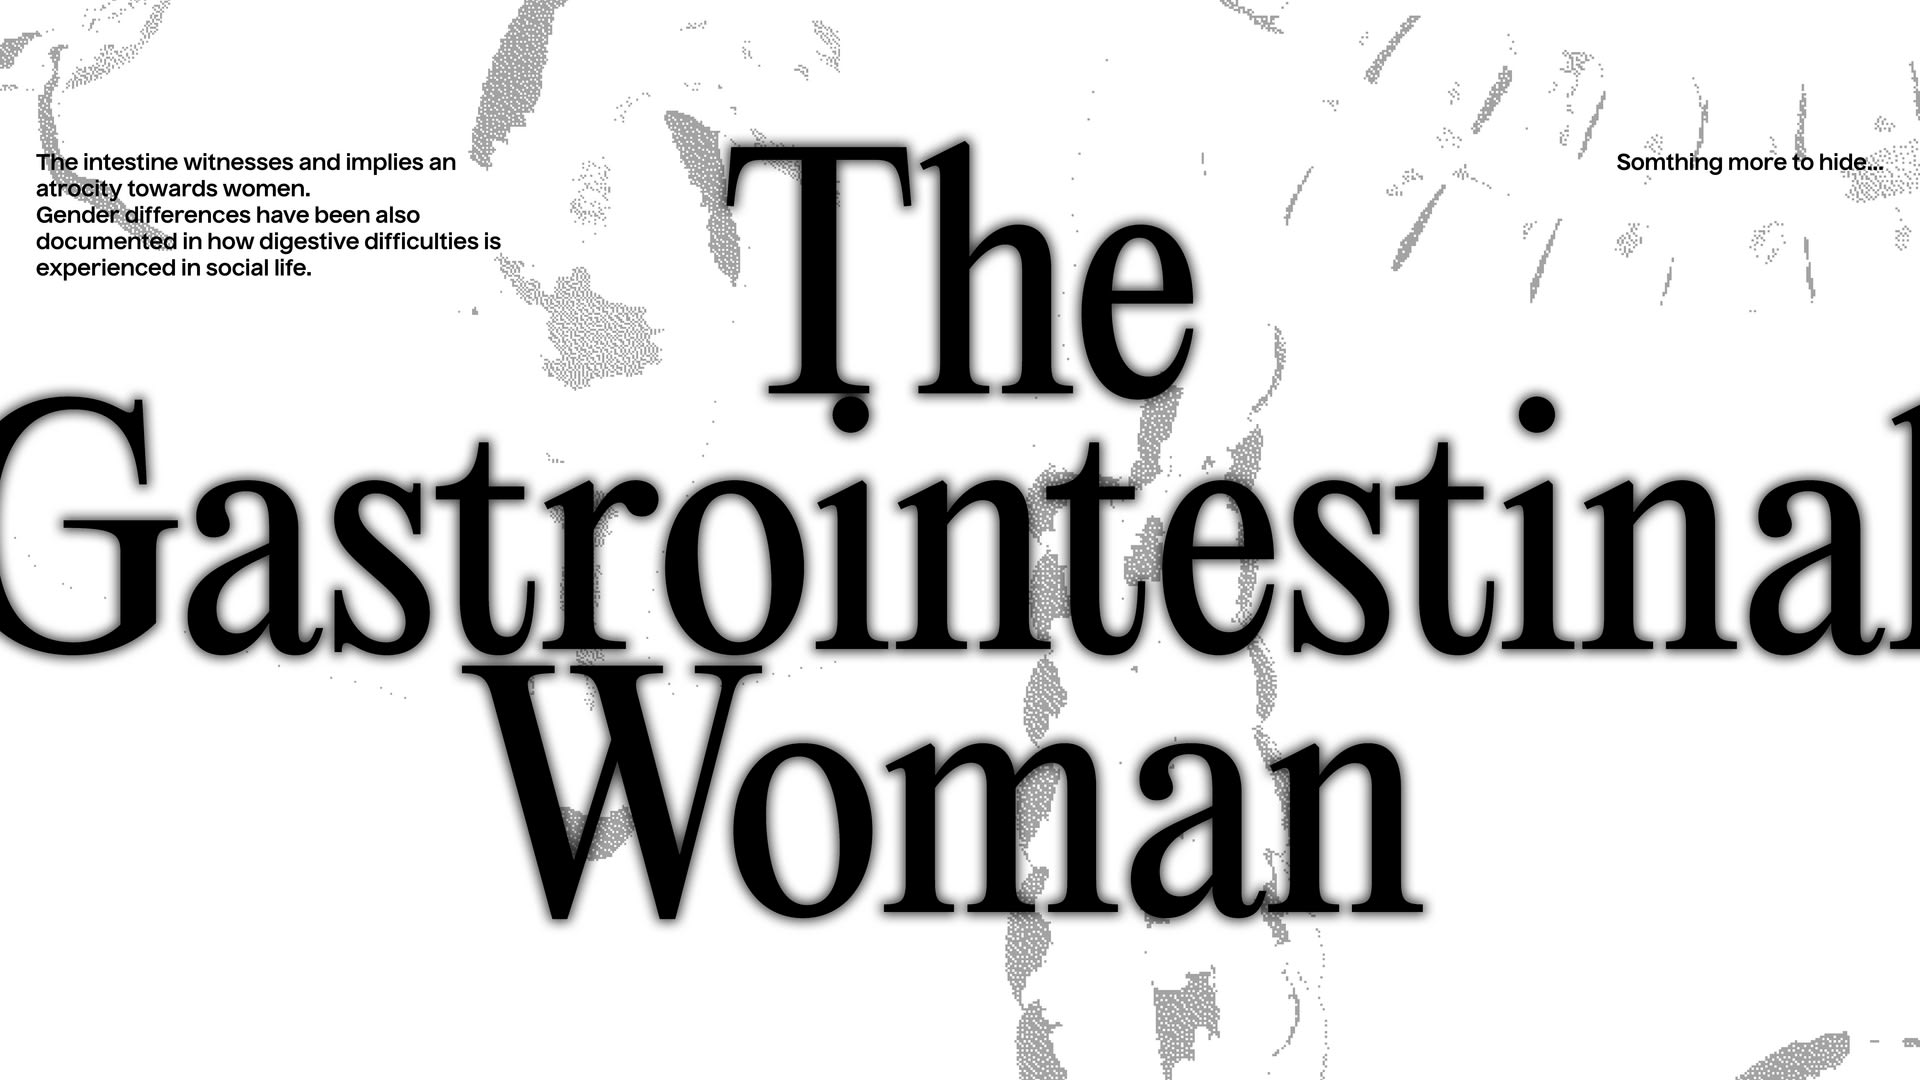 An image of very large black text reading ‘The Gastrointestinal Woman’ and a small section of text, on a white background with grey shapes.